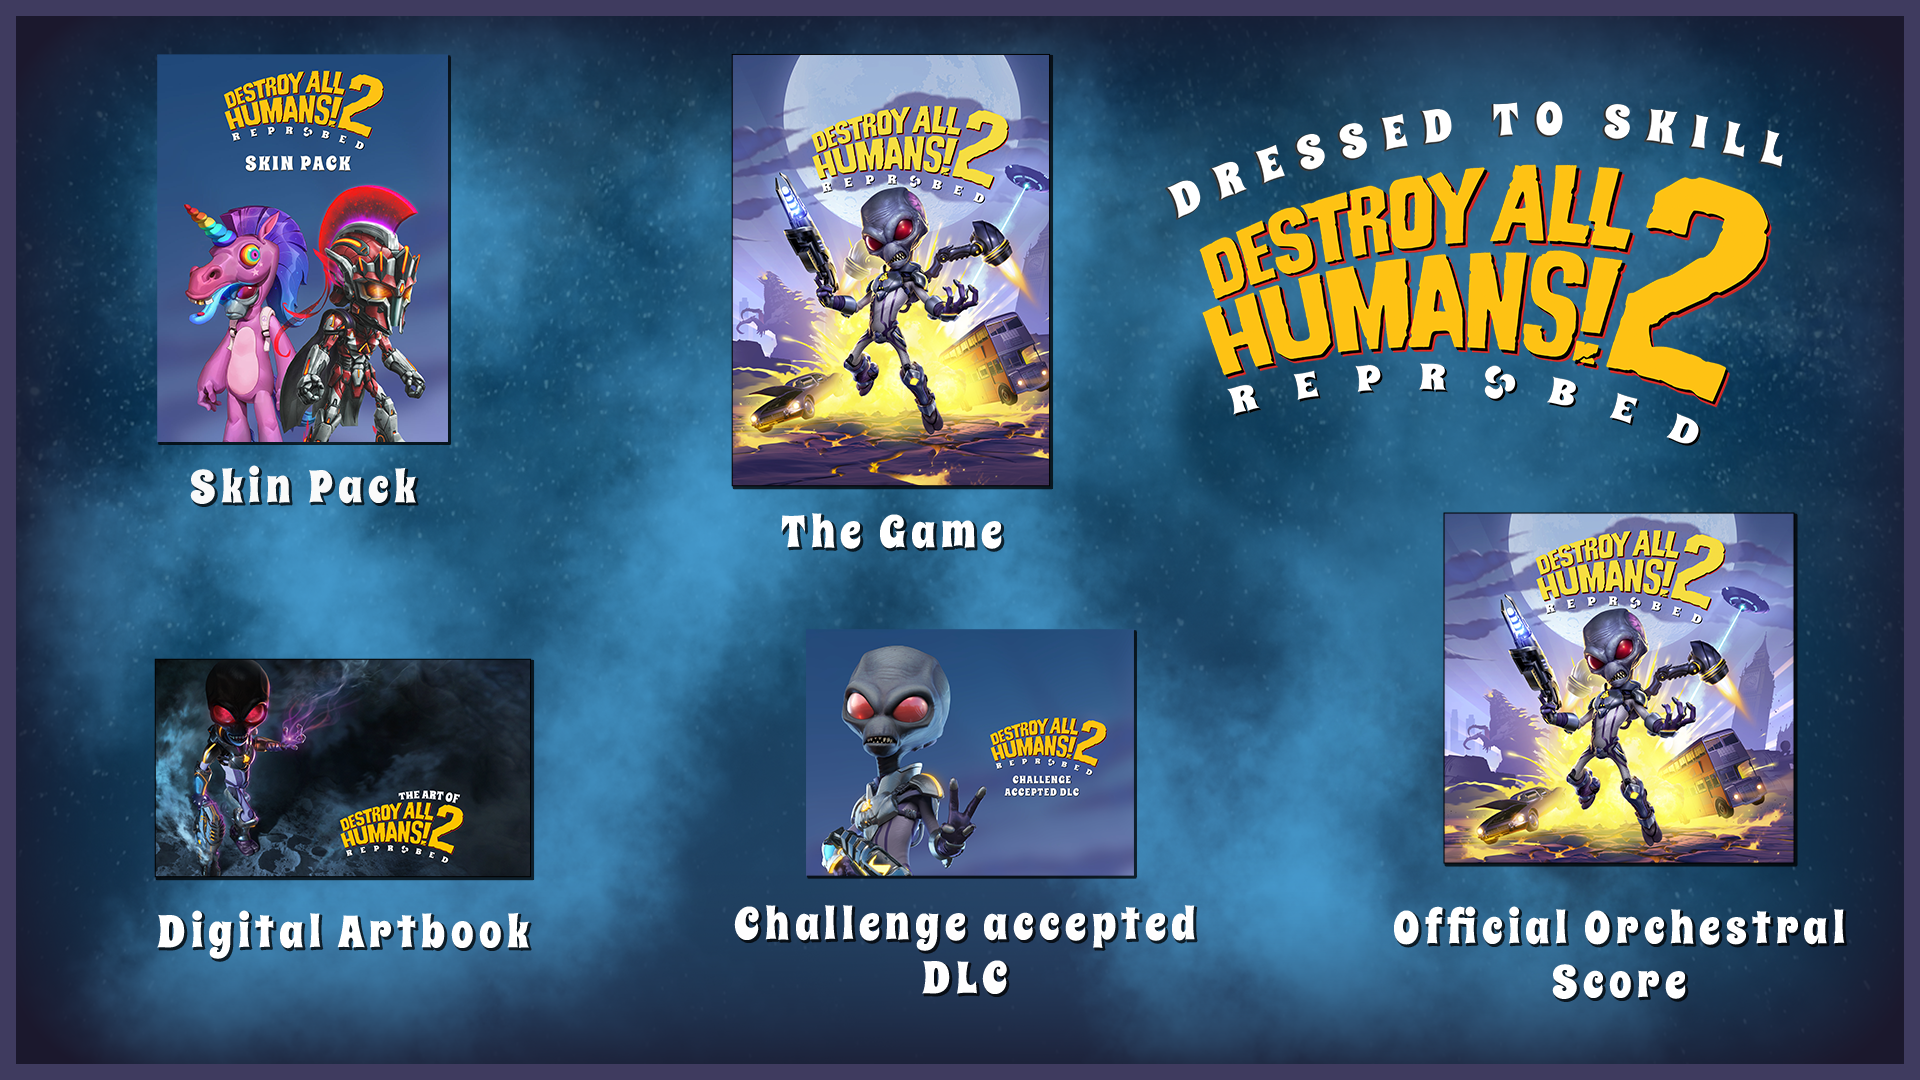 All humans 2 reprobed. Игра destroy all Humans! 2 Reprobed. Destroy all Humans 2 коллекционное издание. Destroy all Humans 2 reprobed 2022. Destroy all Humans Clone Carnage.